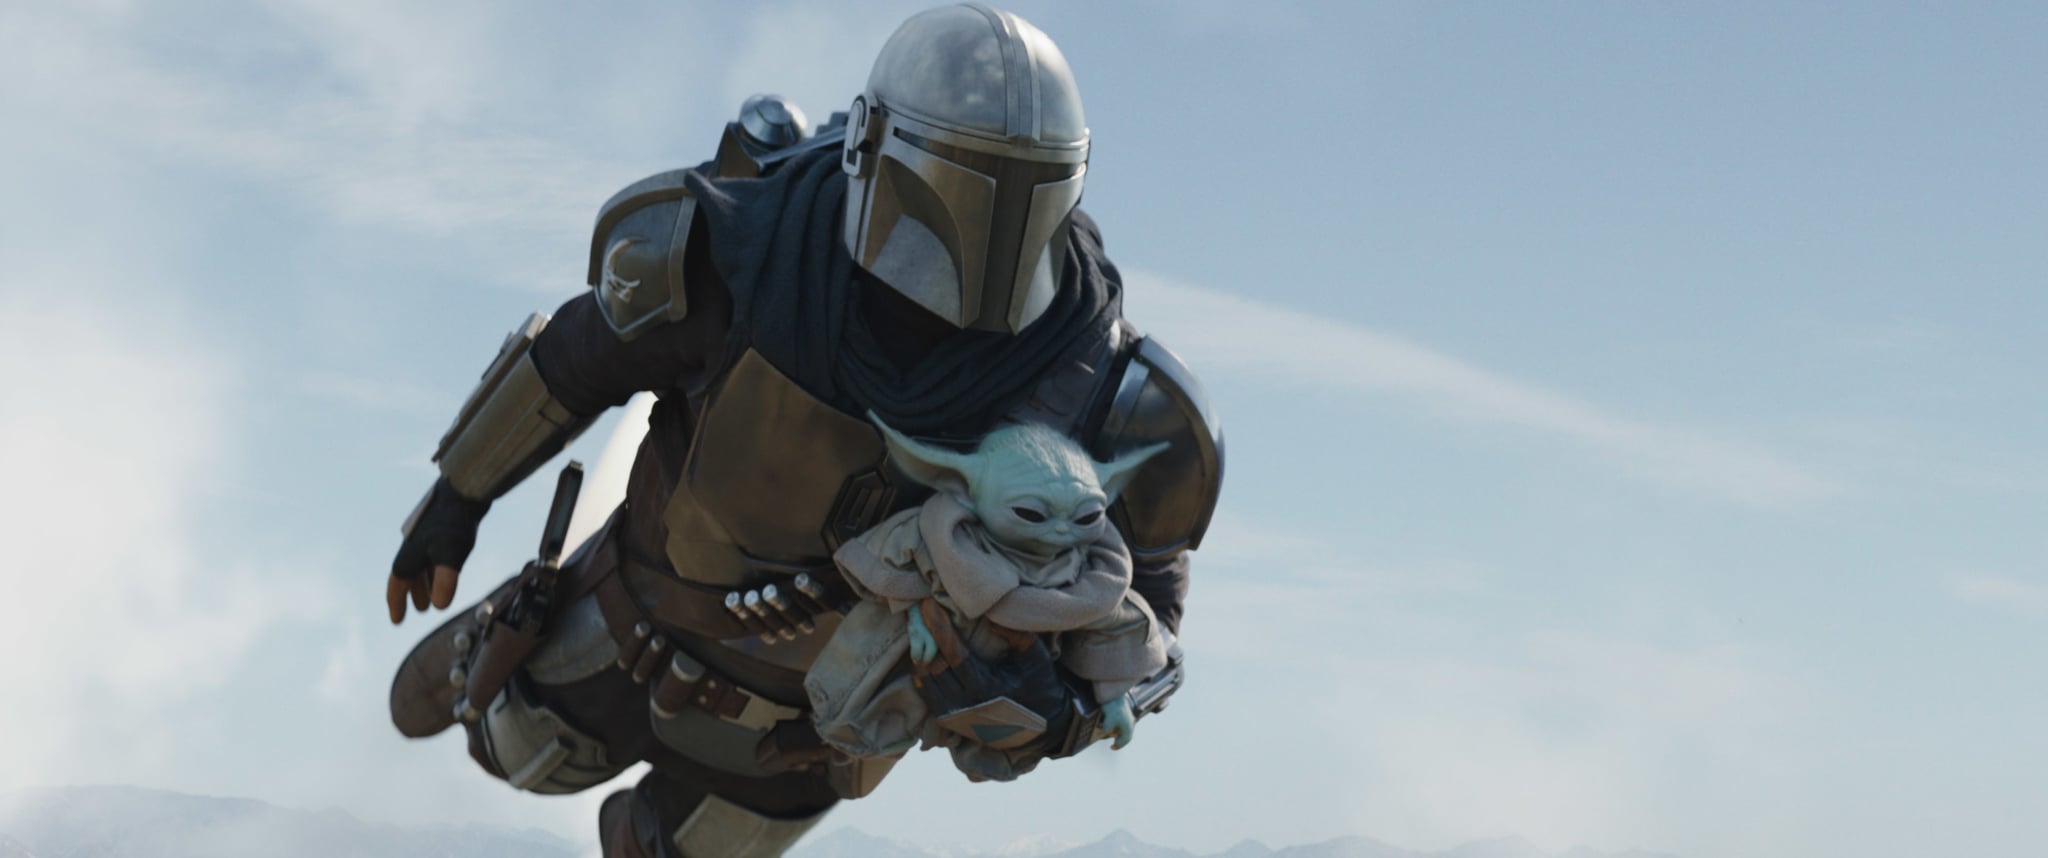 THE MANDALORIAN, from left: Pedro Pascal as The Mandalorian, Grogu aka the Child aka Baby Yoda, 'Chapter 14: The Tragedy', (Season 2, ep. 206, aired Dec. 4, 2020). photo: Disney+/Lucasfilm / Courtesy Everett Collection